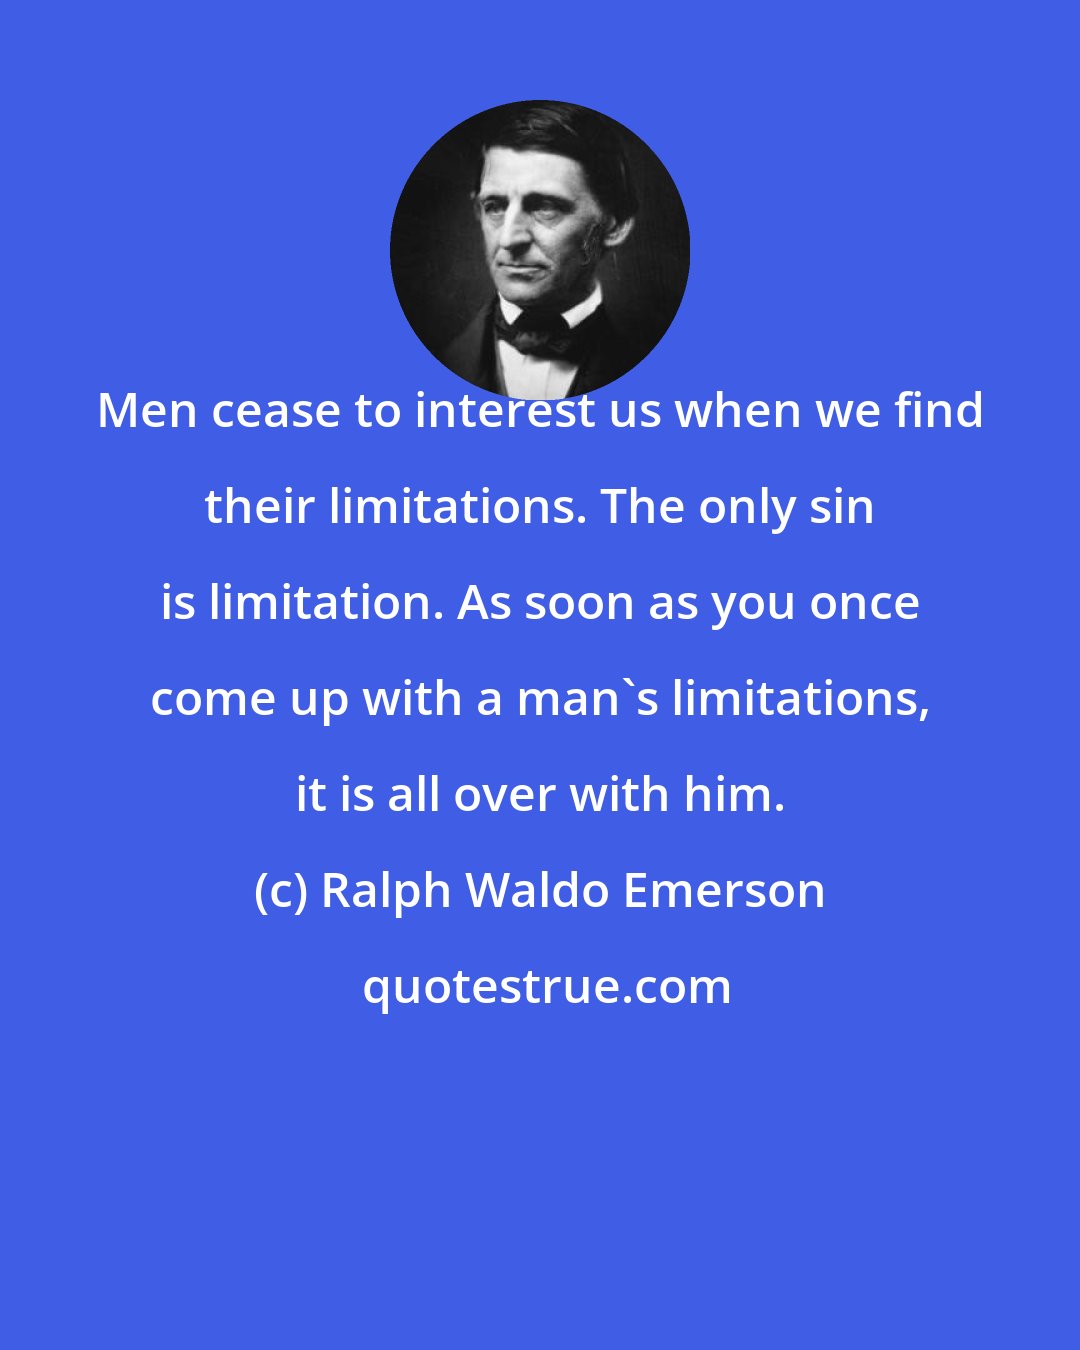 Ralph Waldo Emerson: Men cease to interest us when we find their limitations. The only sin is limitation. As soon as you once come up with a man's limitations, it is all over with him.